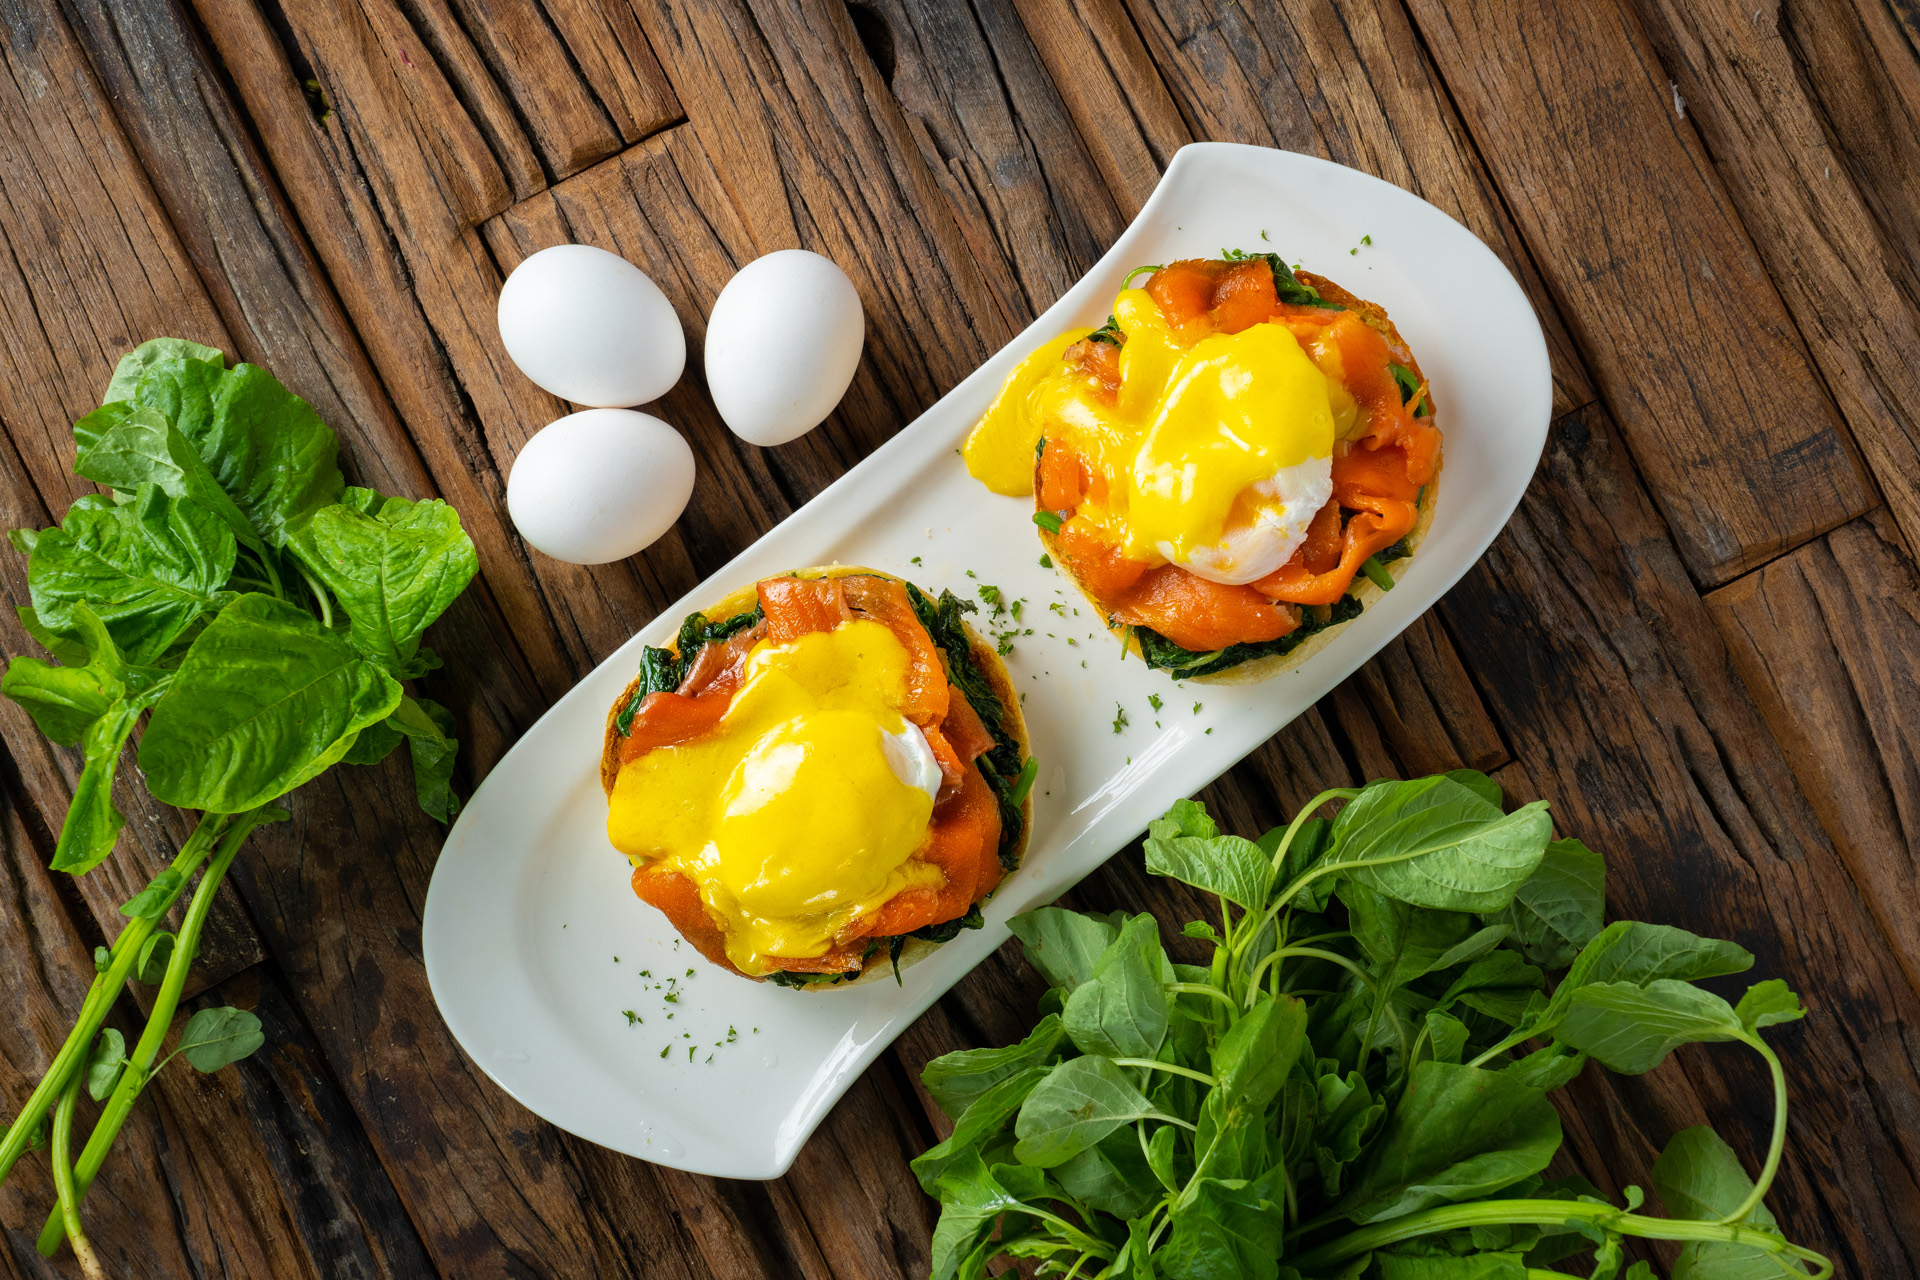 classic eggs benedict with smoked salmon and served on toasted muffin